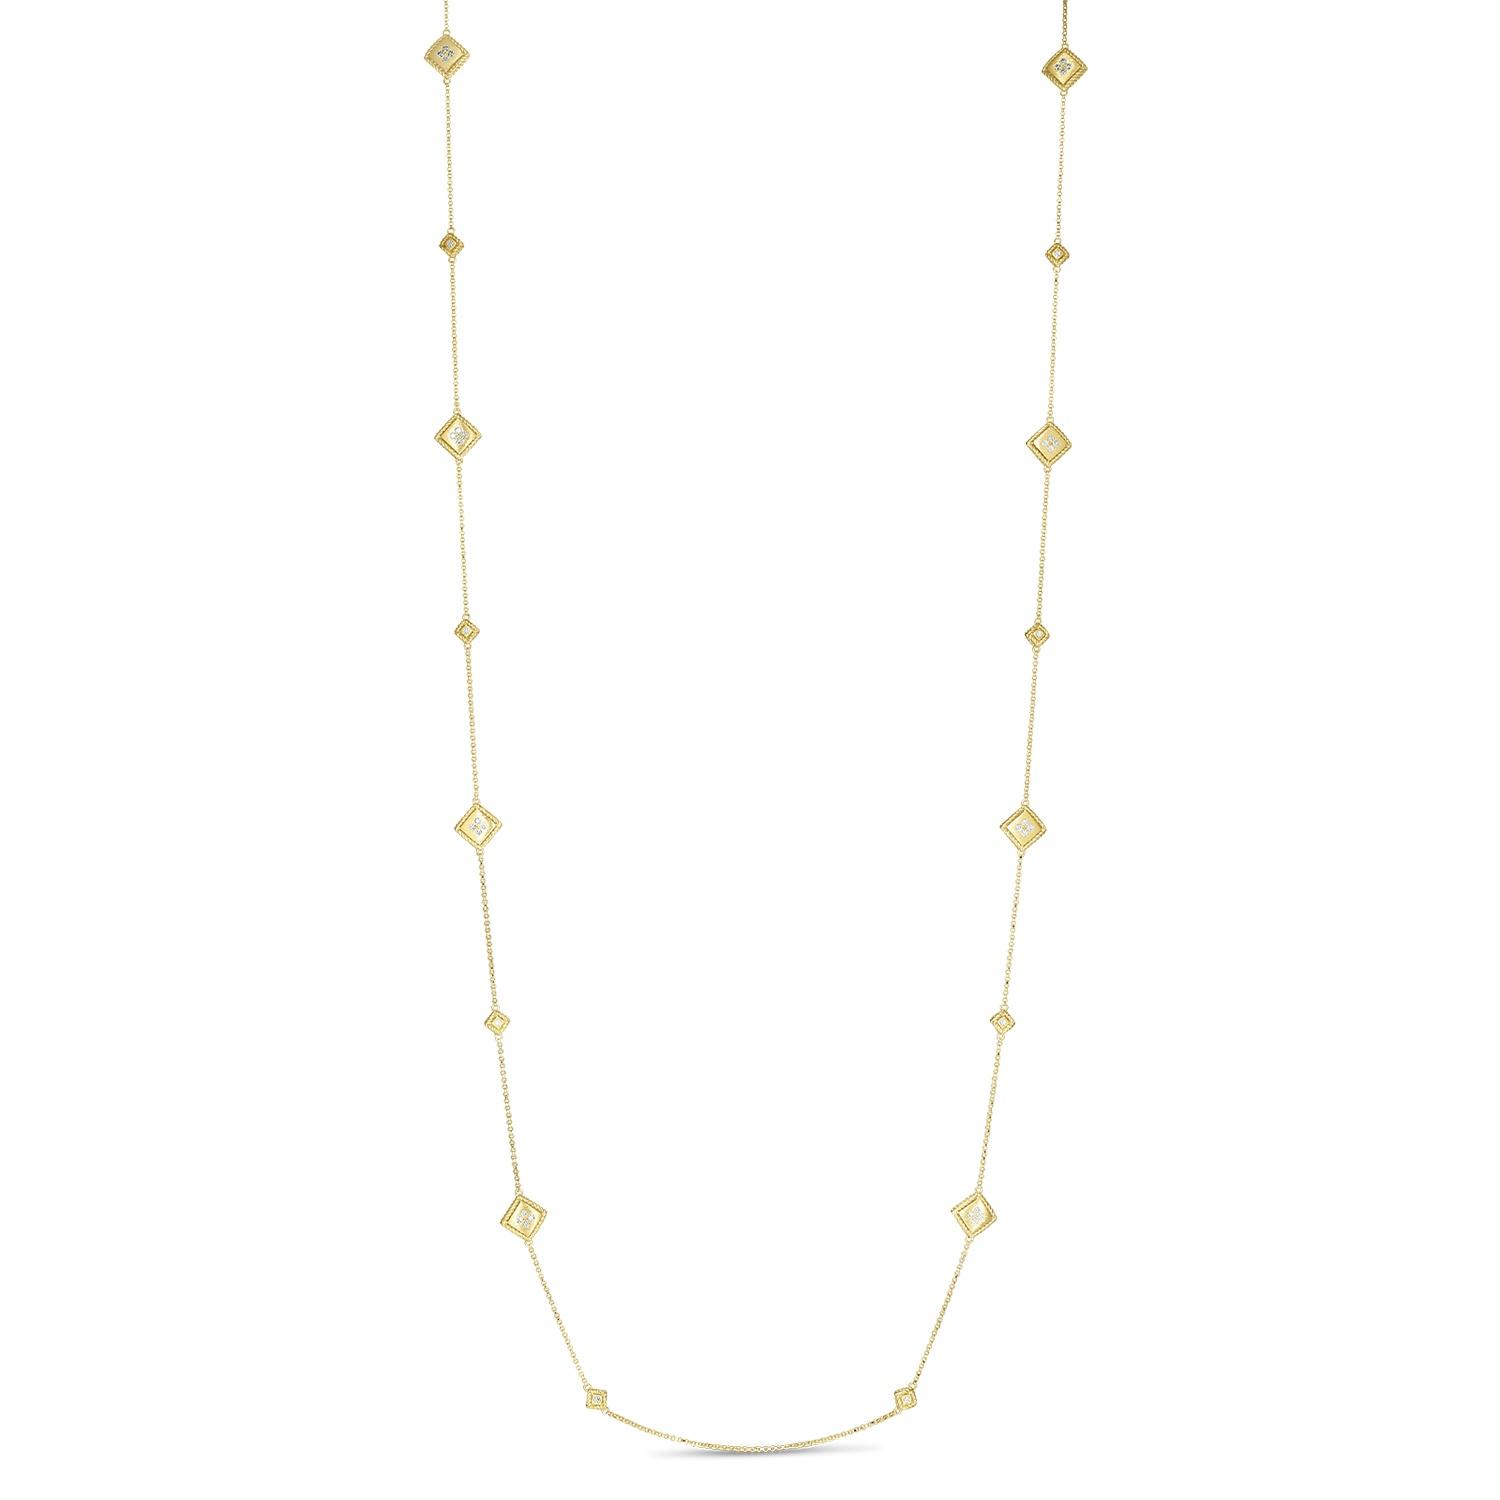 Roberto Coin 18k Yellow Gold Palazzo Ducale Diamond Station Necklace, 35"